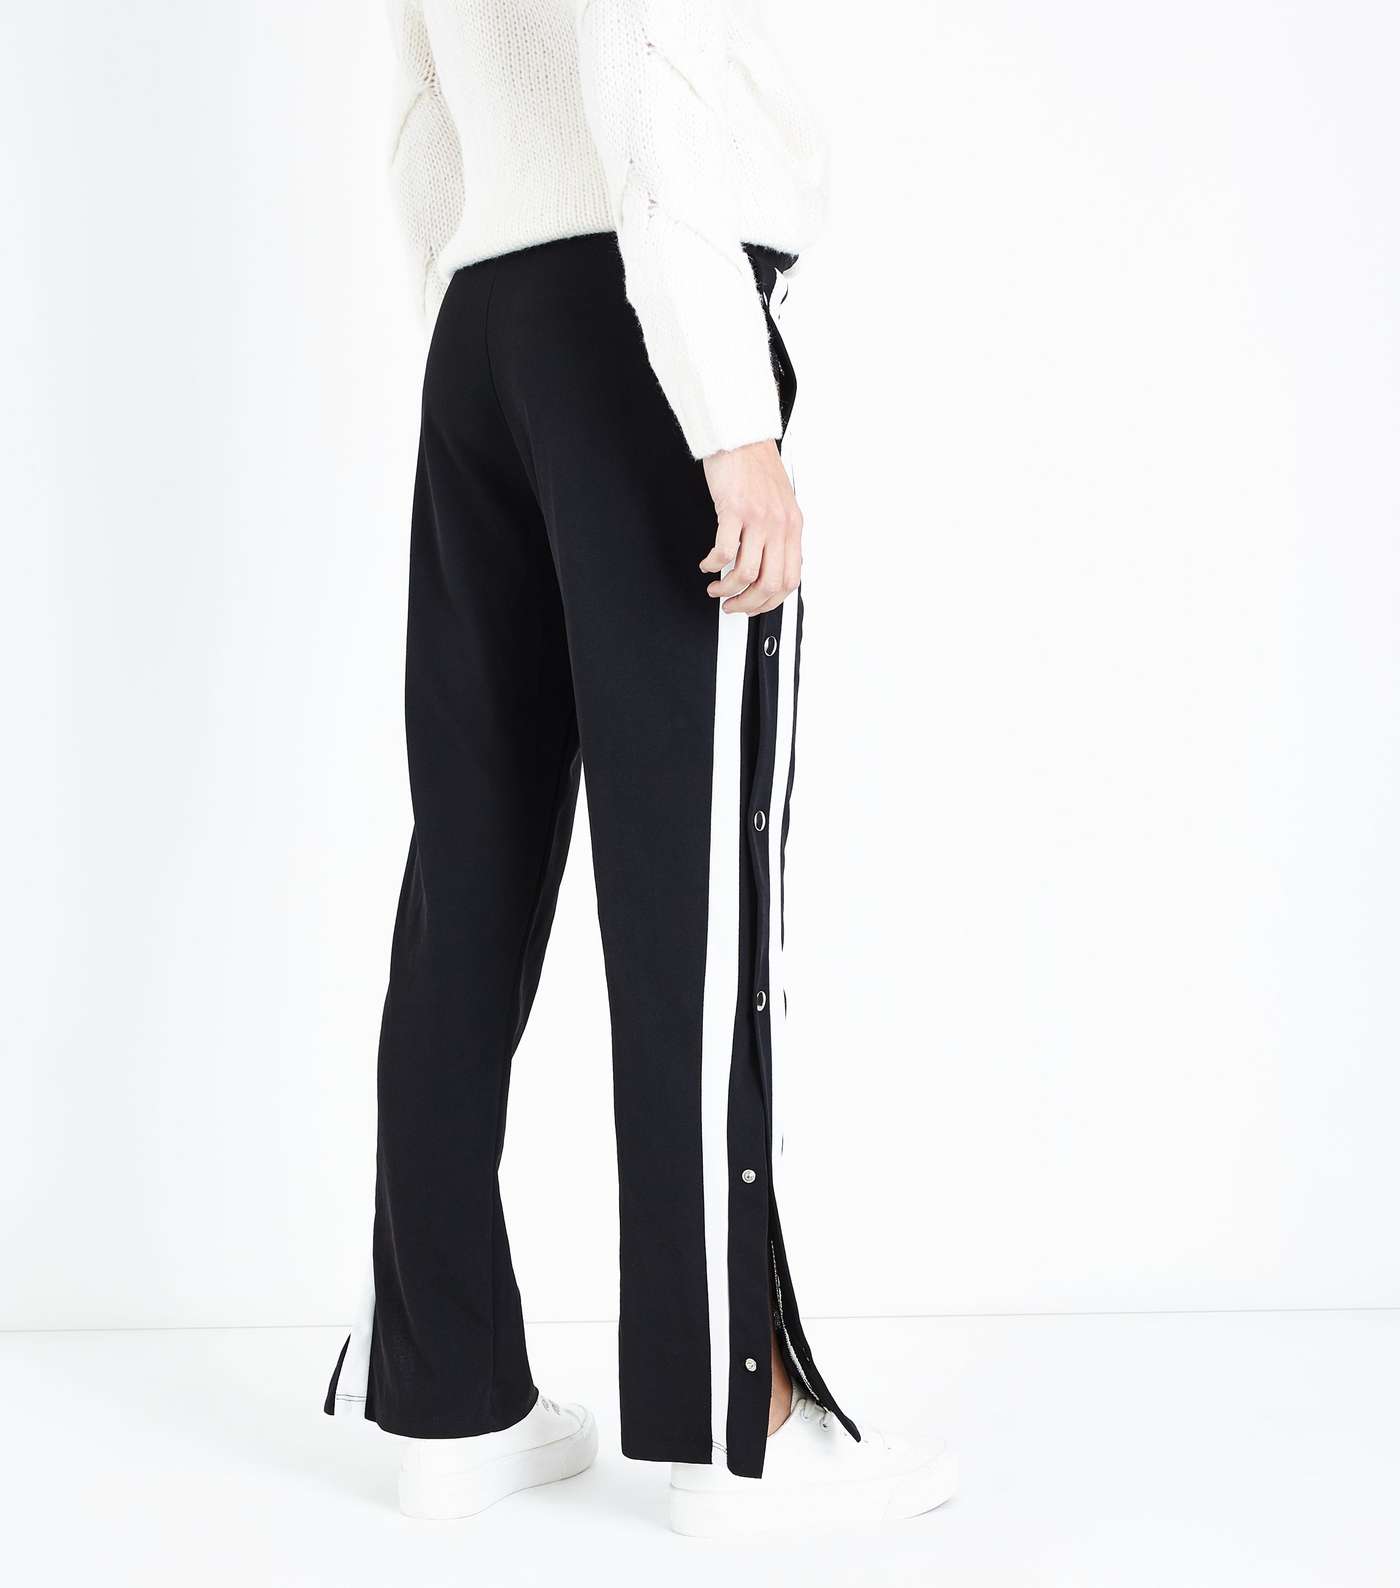 Cameo Rose Black Double Stripe Popper Side Trousers Image 3